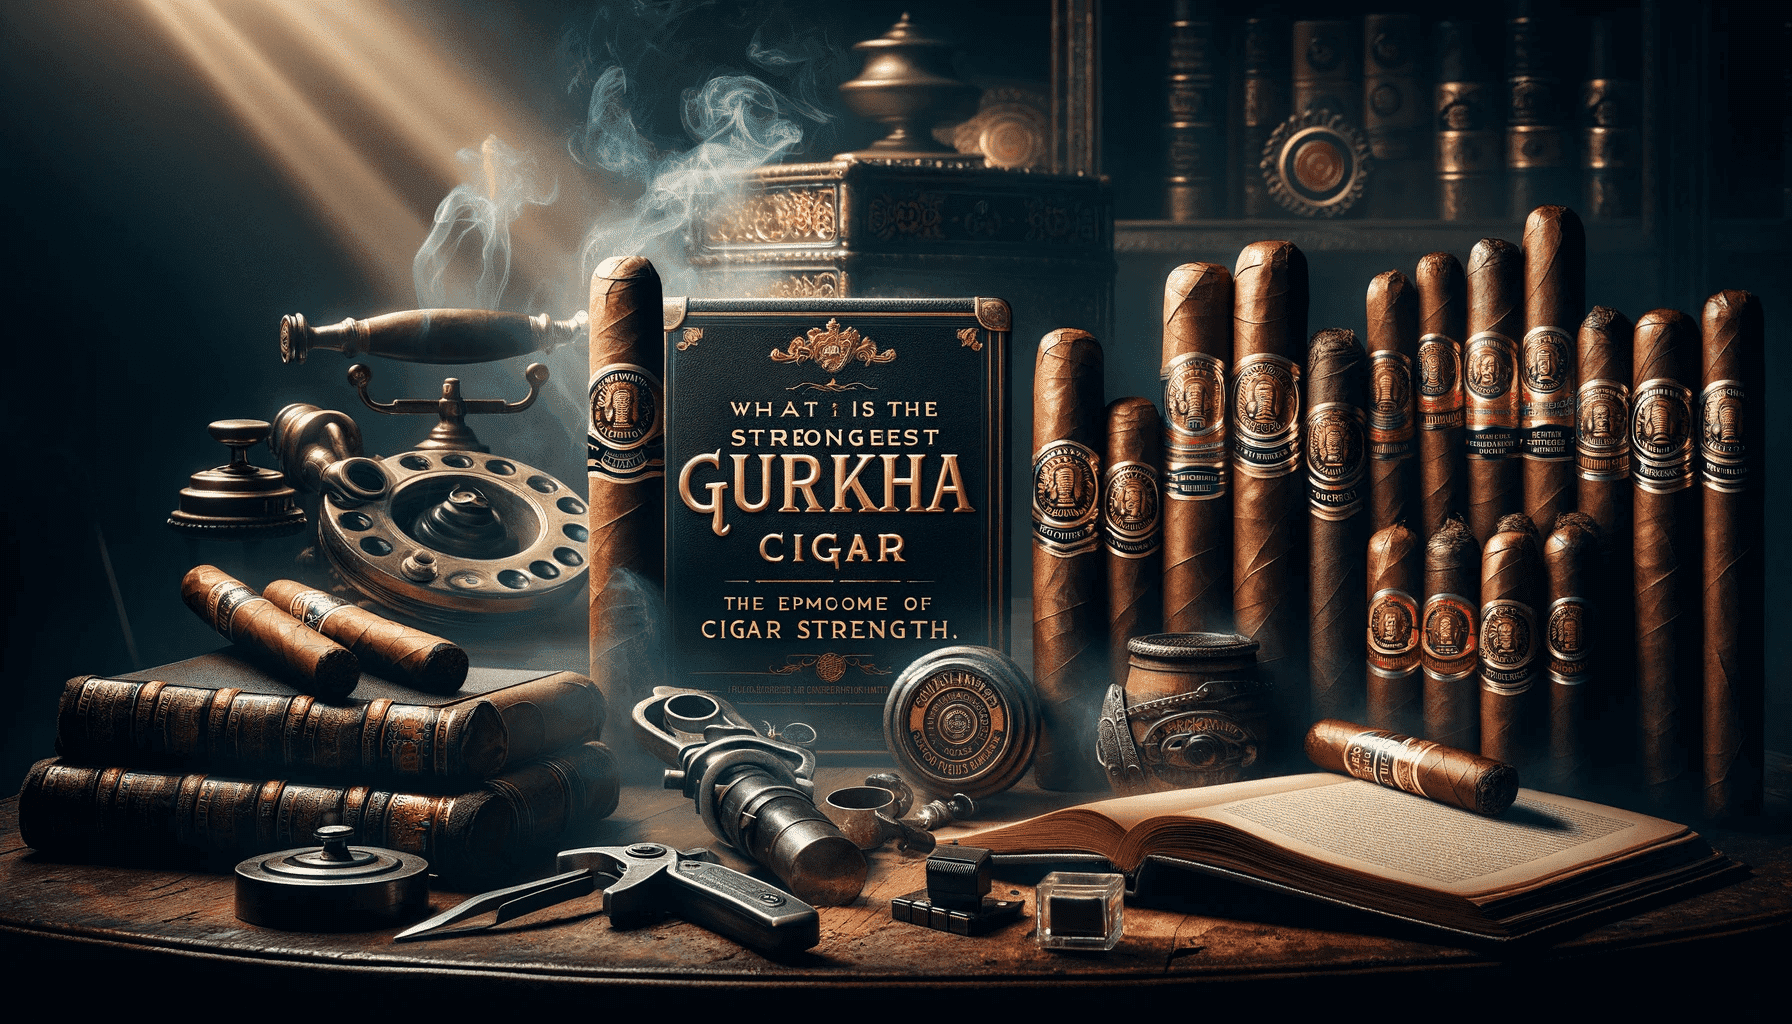 What Is the Strongest Gurkha Cigar?